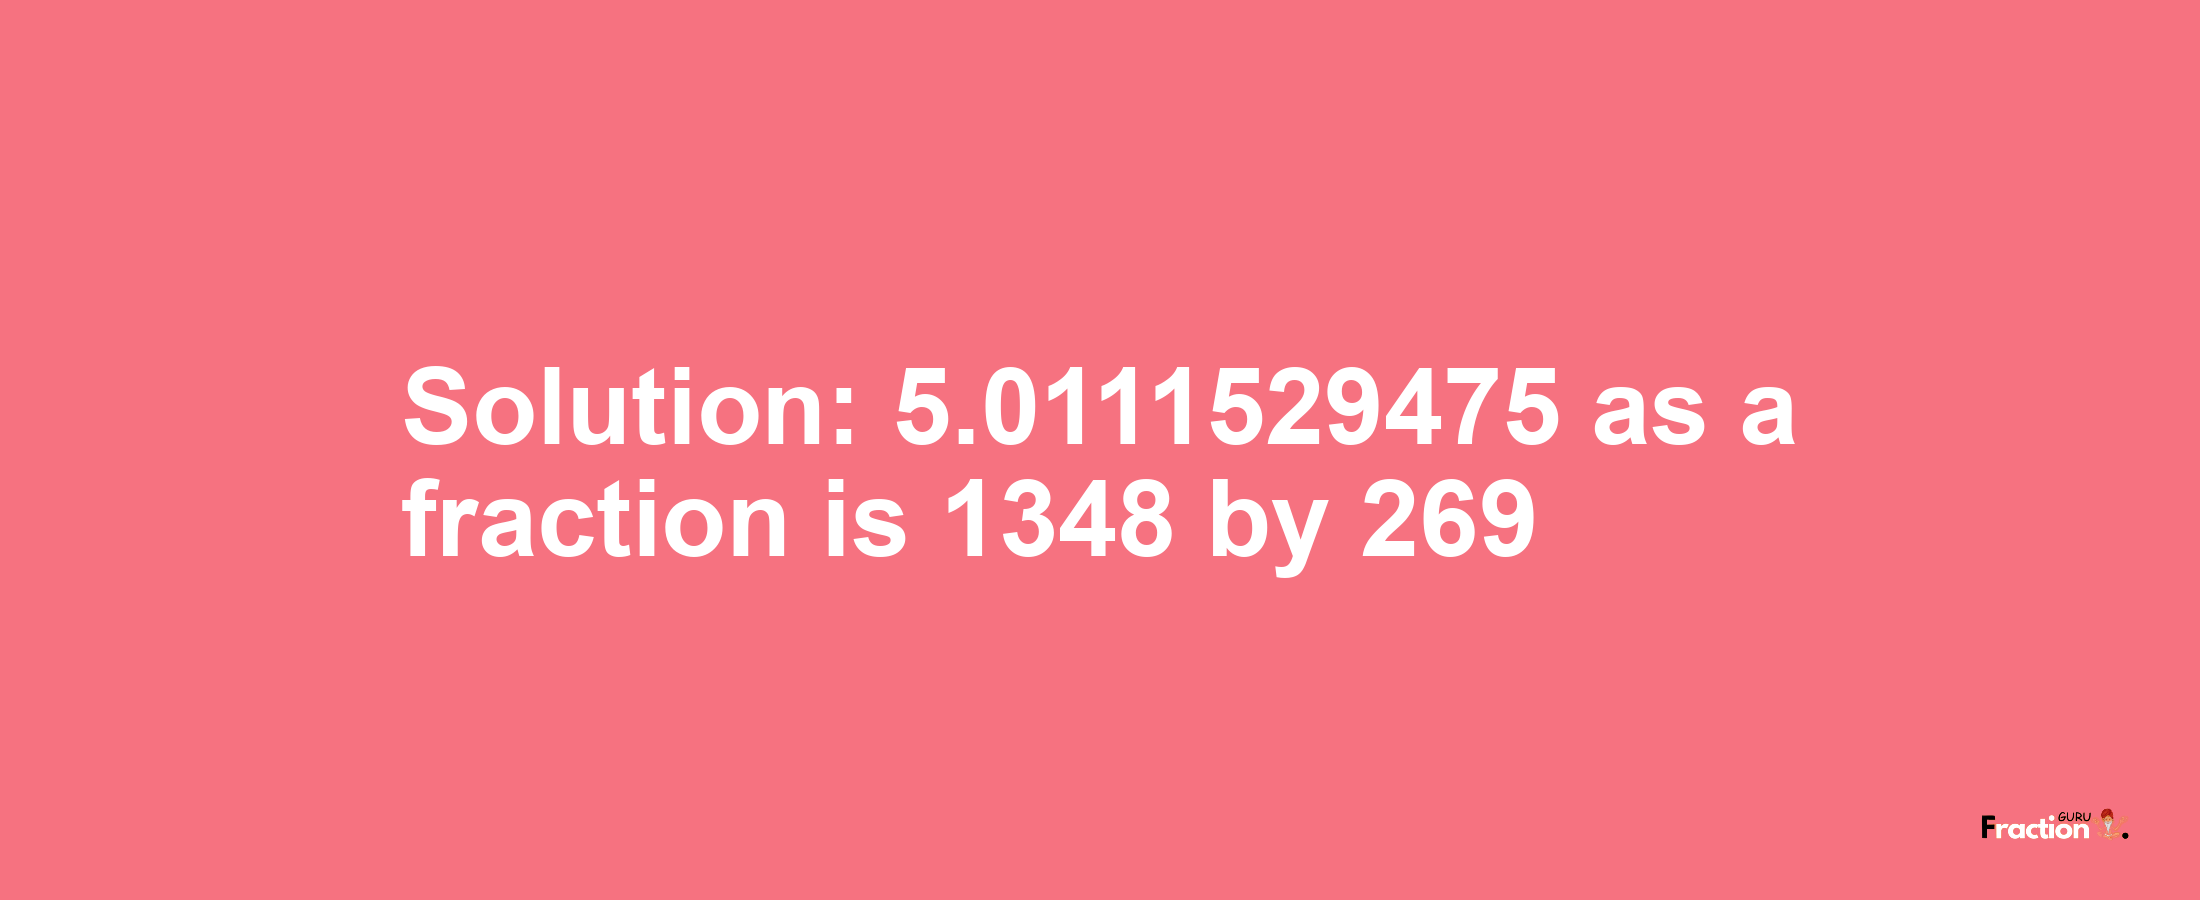 Solution:5.0111529475 as a fraction is 1348/269